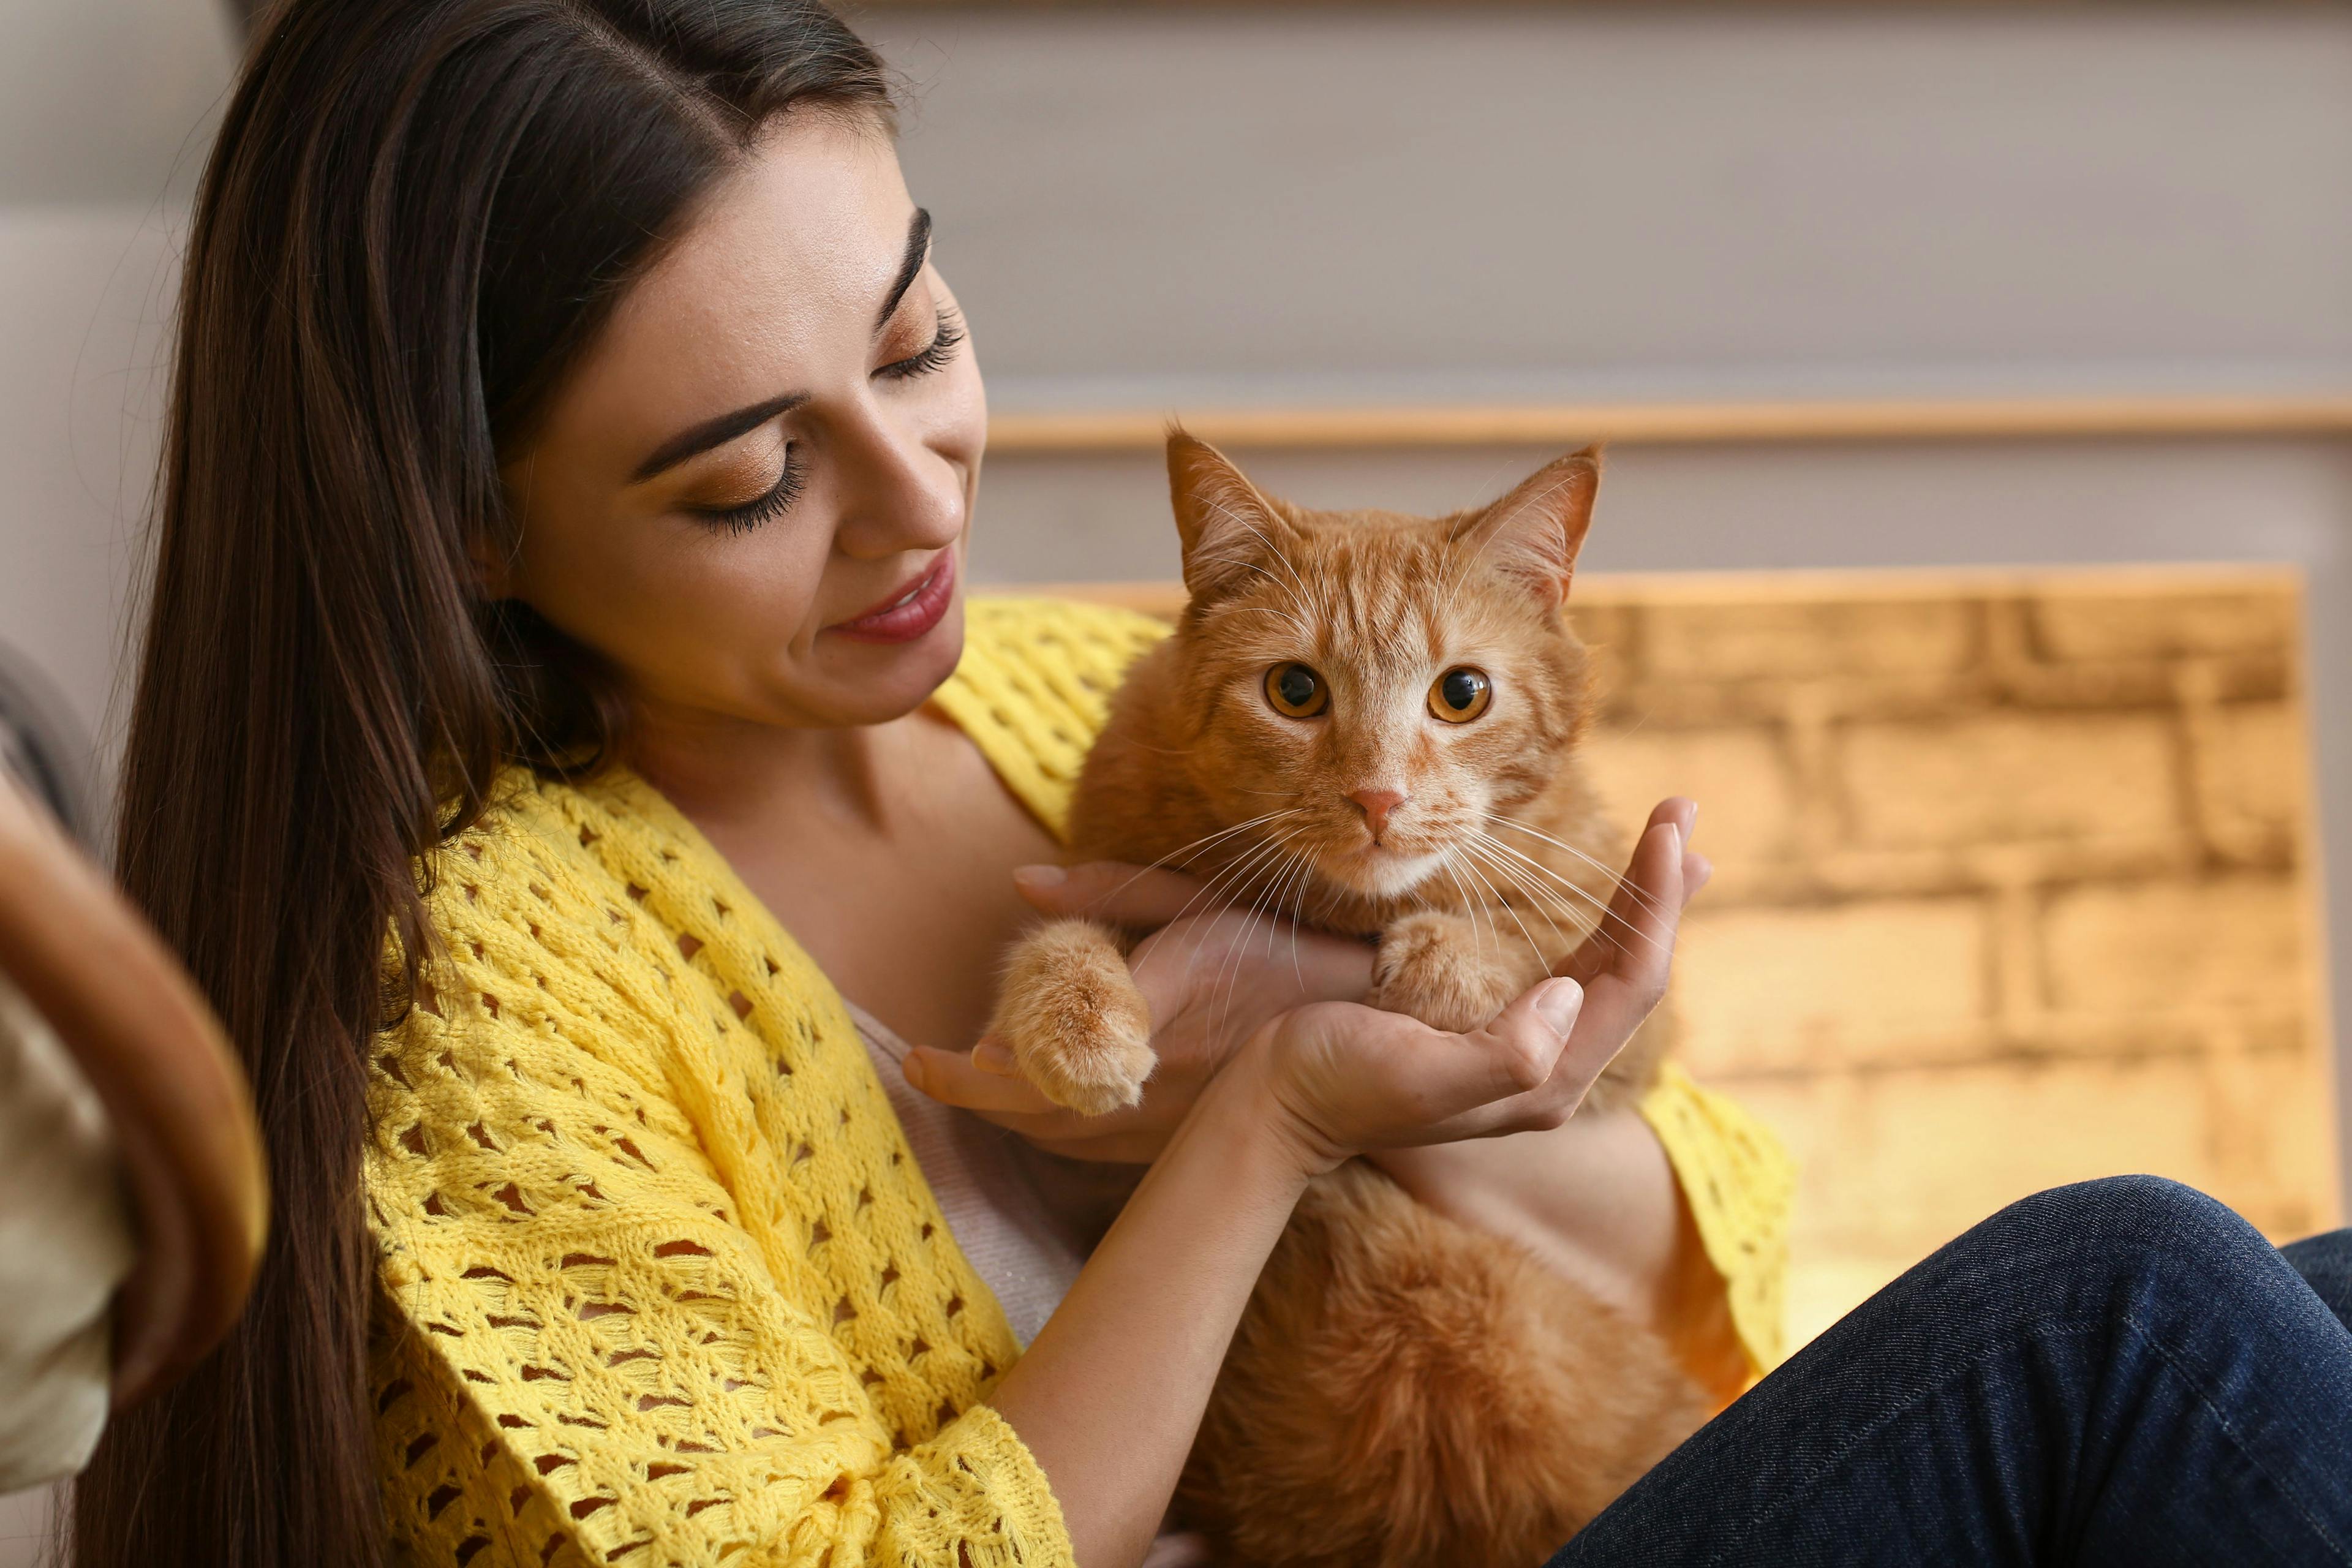 Matters of the heart: Educating clients about feline heartworm disease prevention